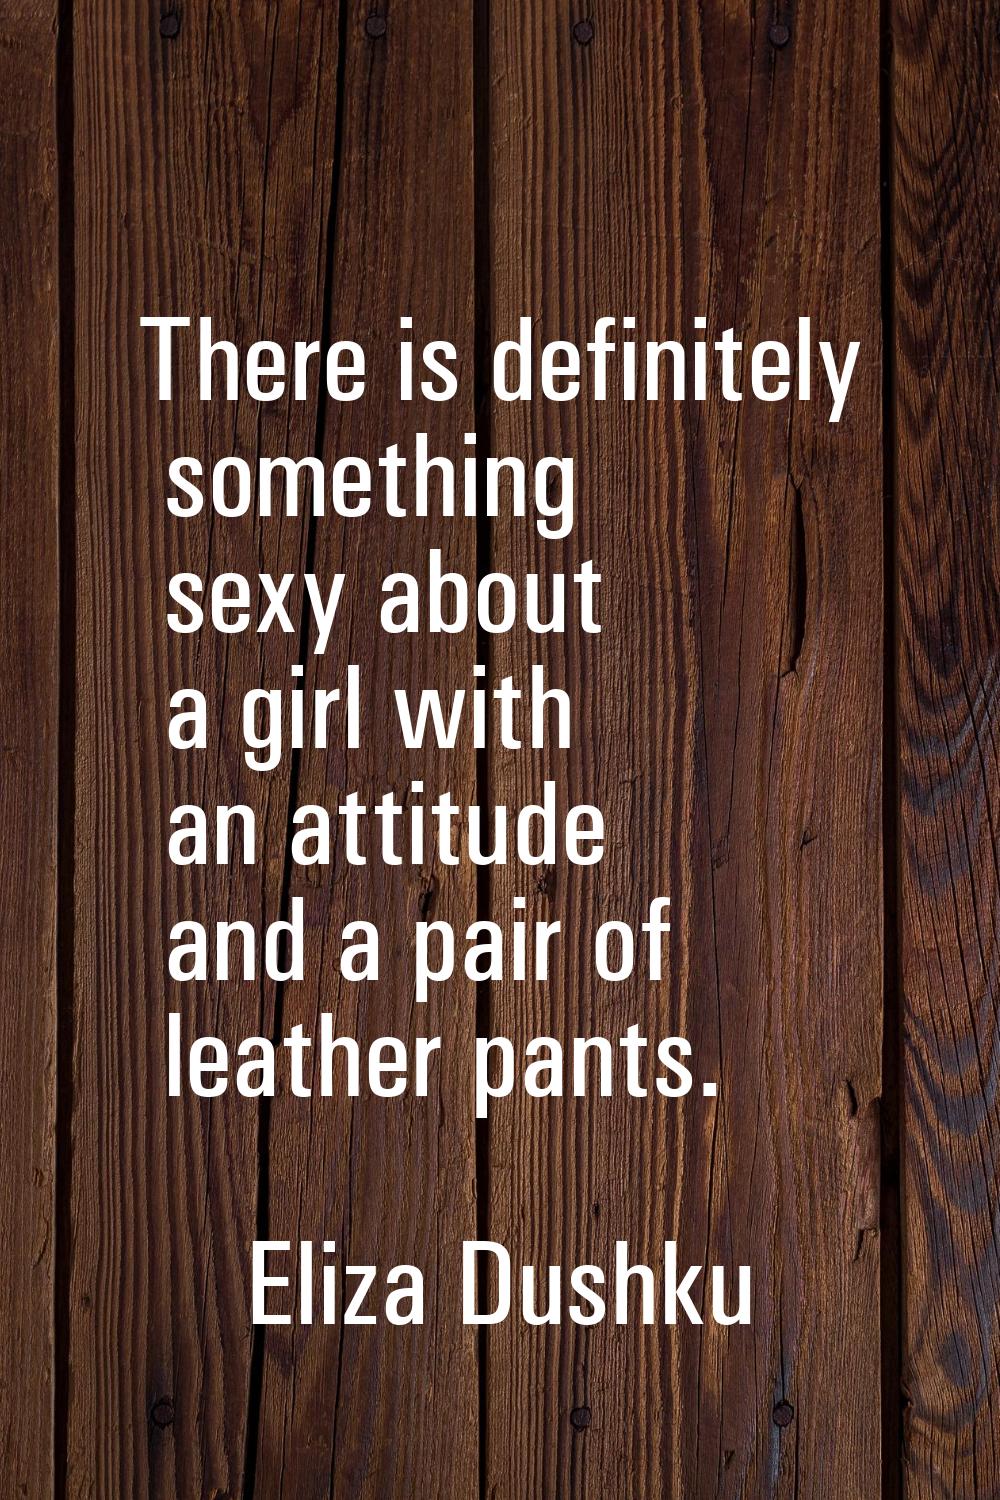 There is definitely something sexy about a girl with an attitude and a pair of leather pants.